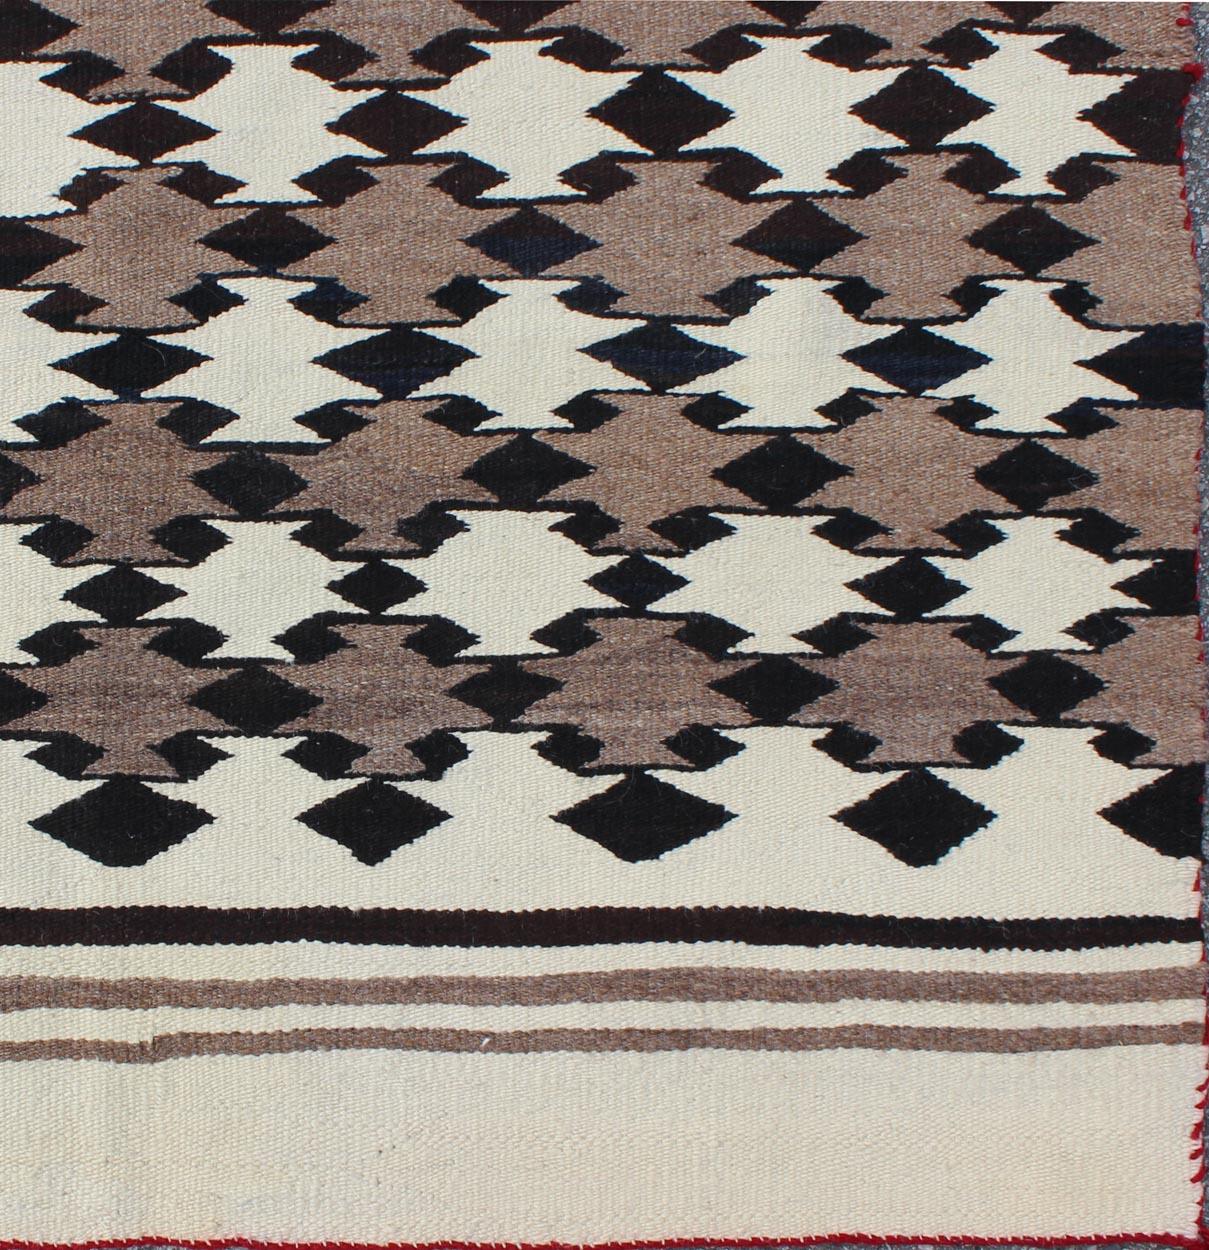 American Navajo rug with latticework tribal design, rug I-1101, country of origin / type: North America / Navajo, circa 1950 early 20th century.

Measures: 3'3'' x 5'2''.

This intriguing Navajo rug was woven in the United States during the